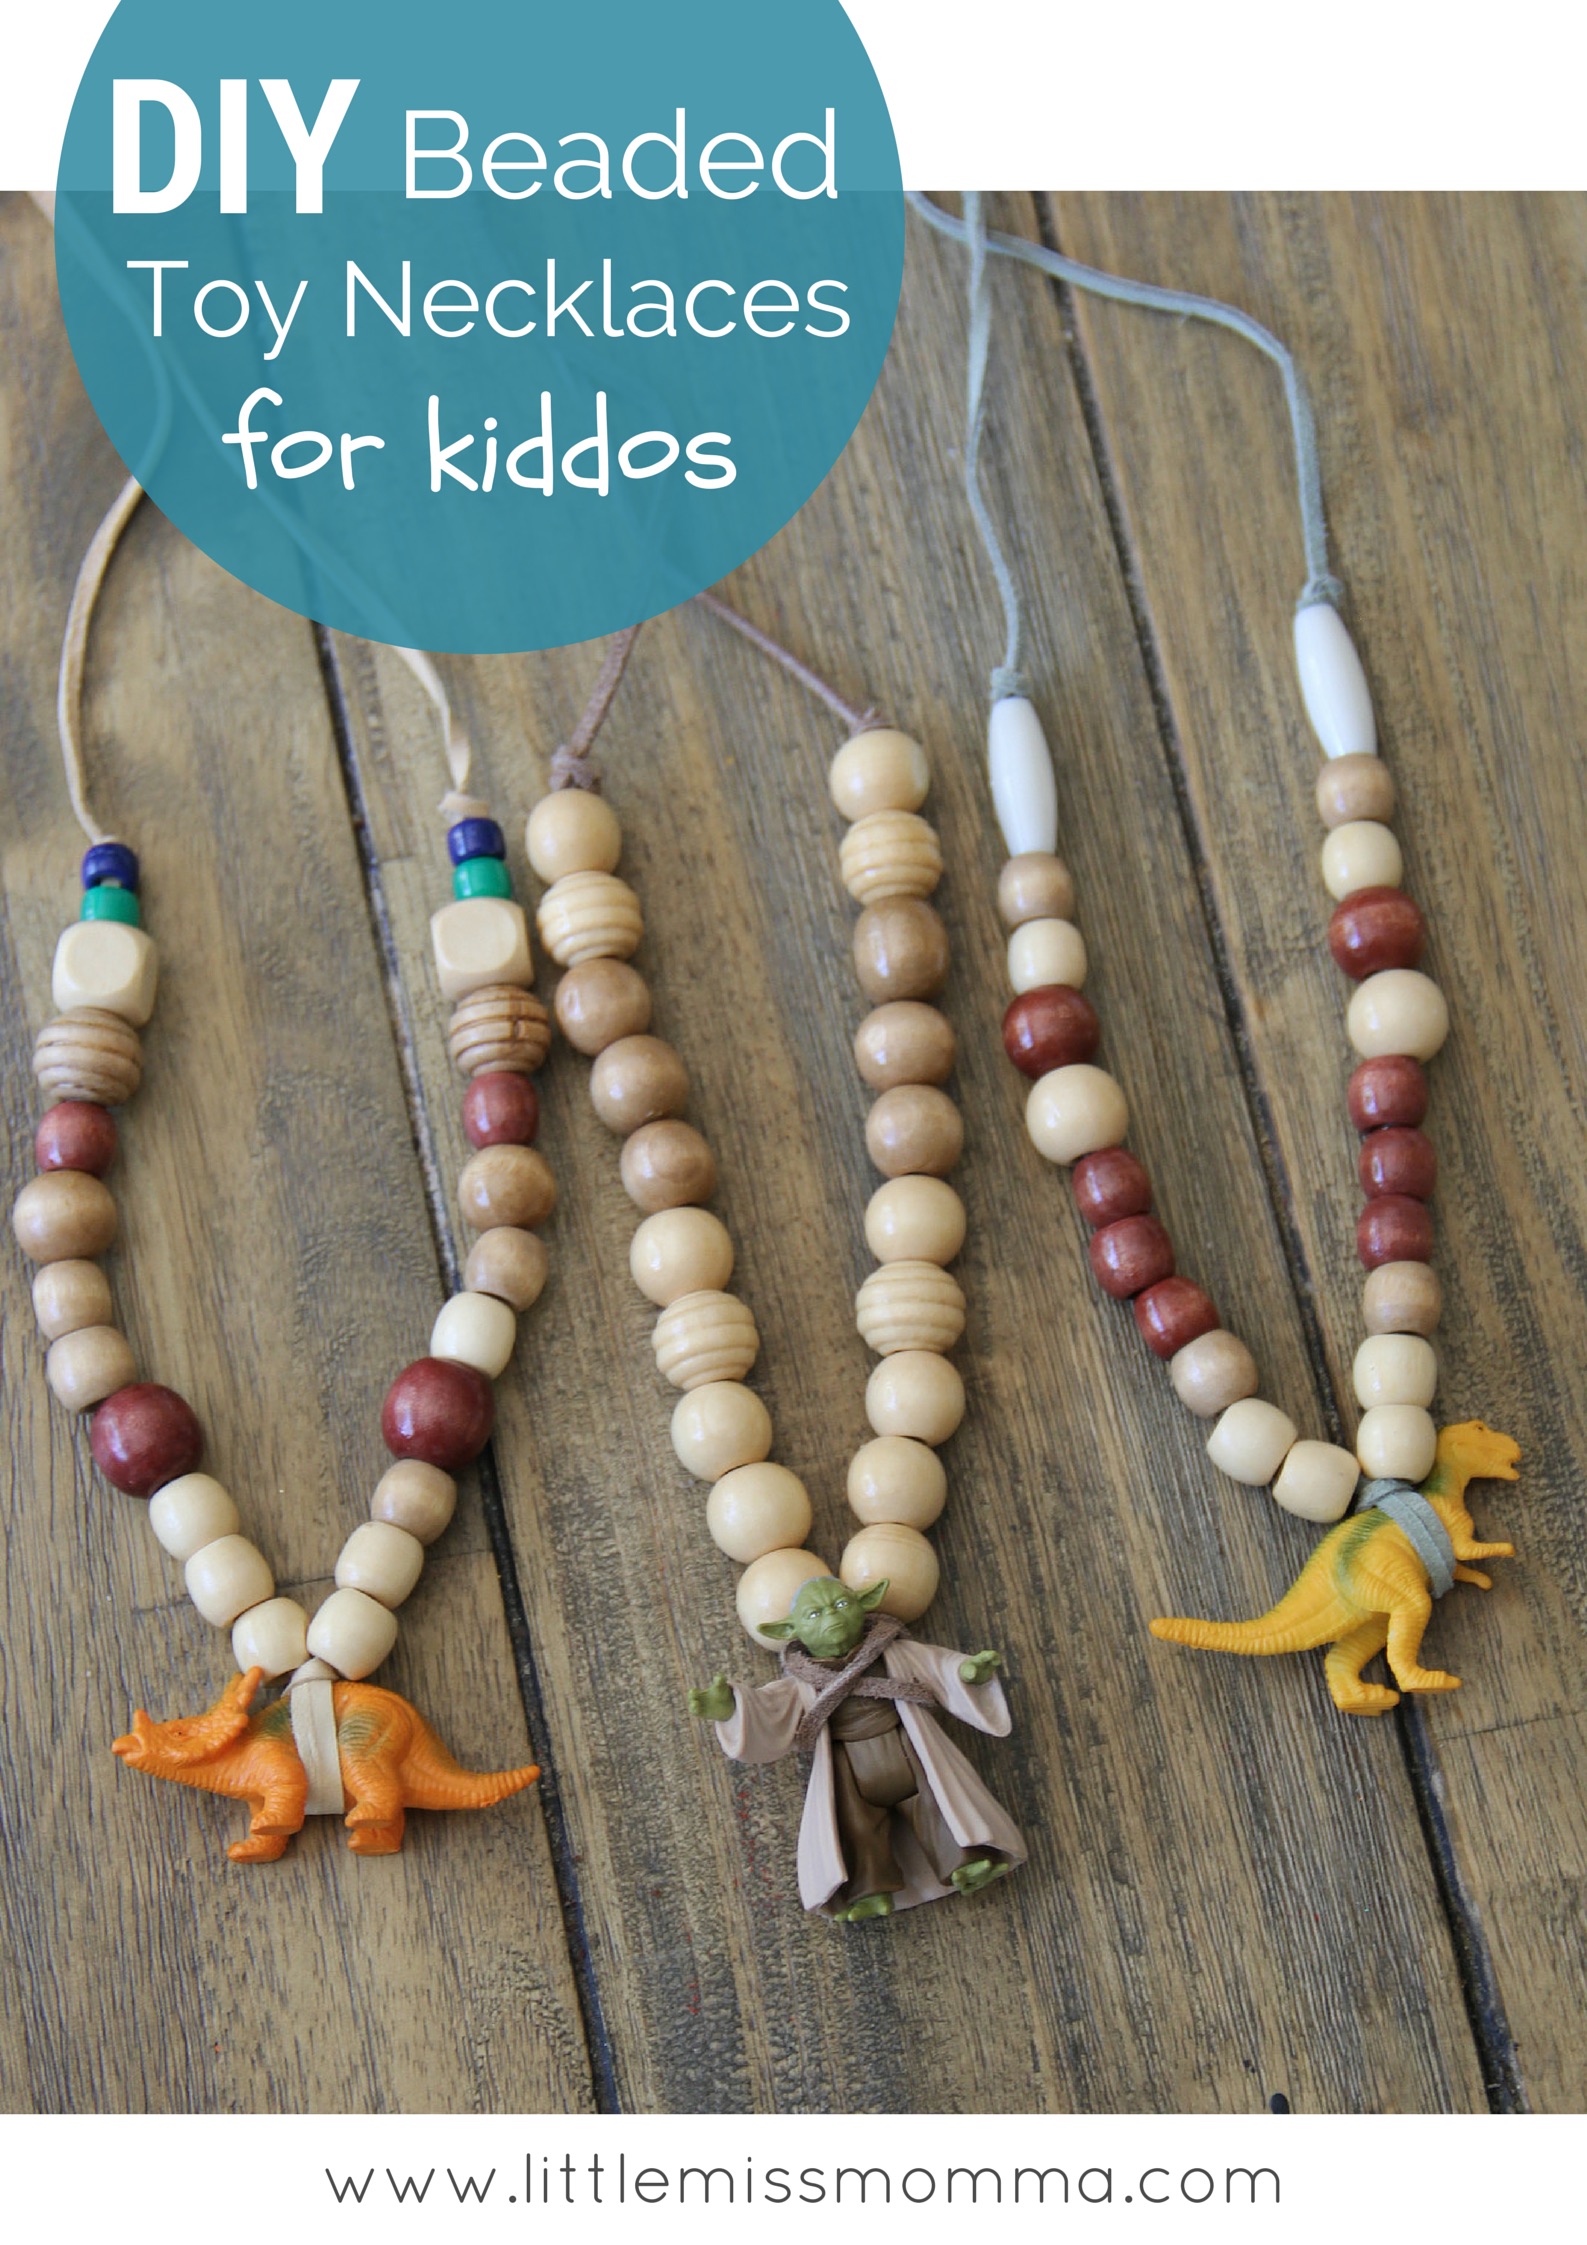 Wooden Beads on a String making a Colorful Toy Necklace Stock